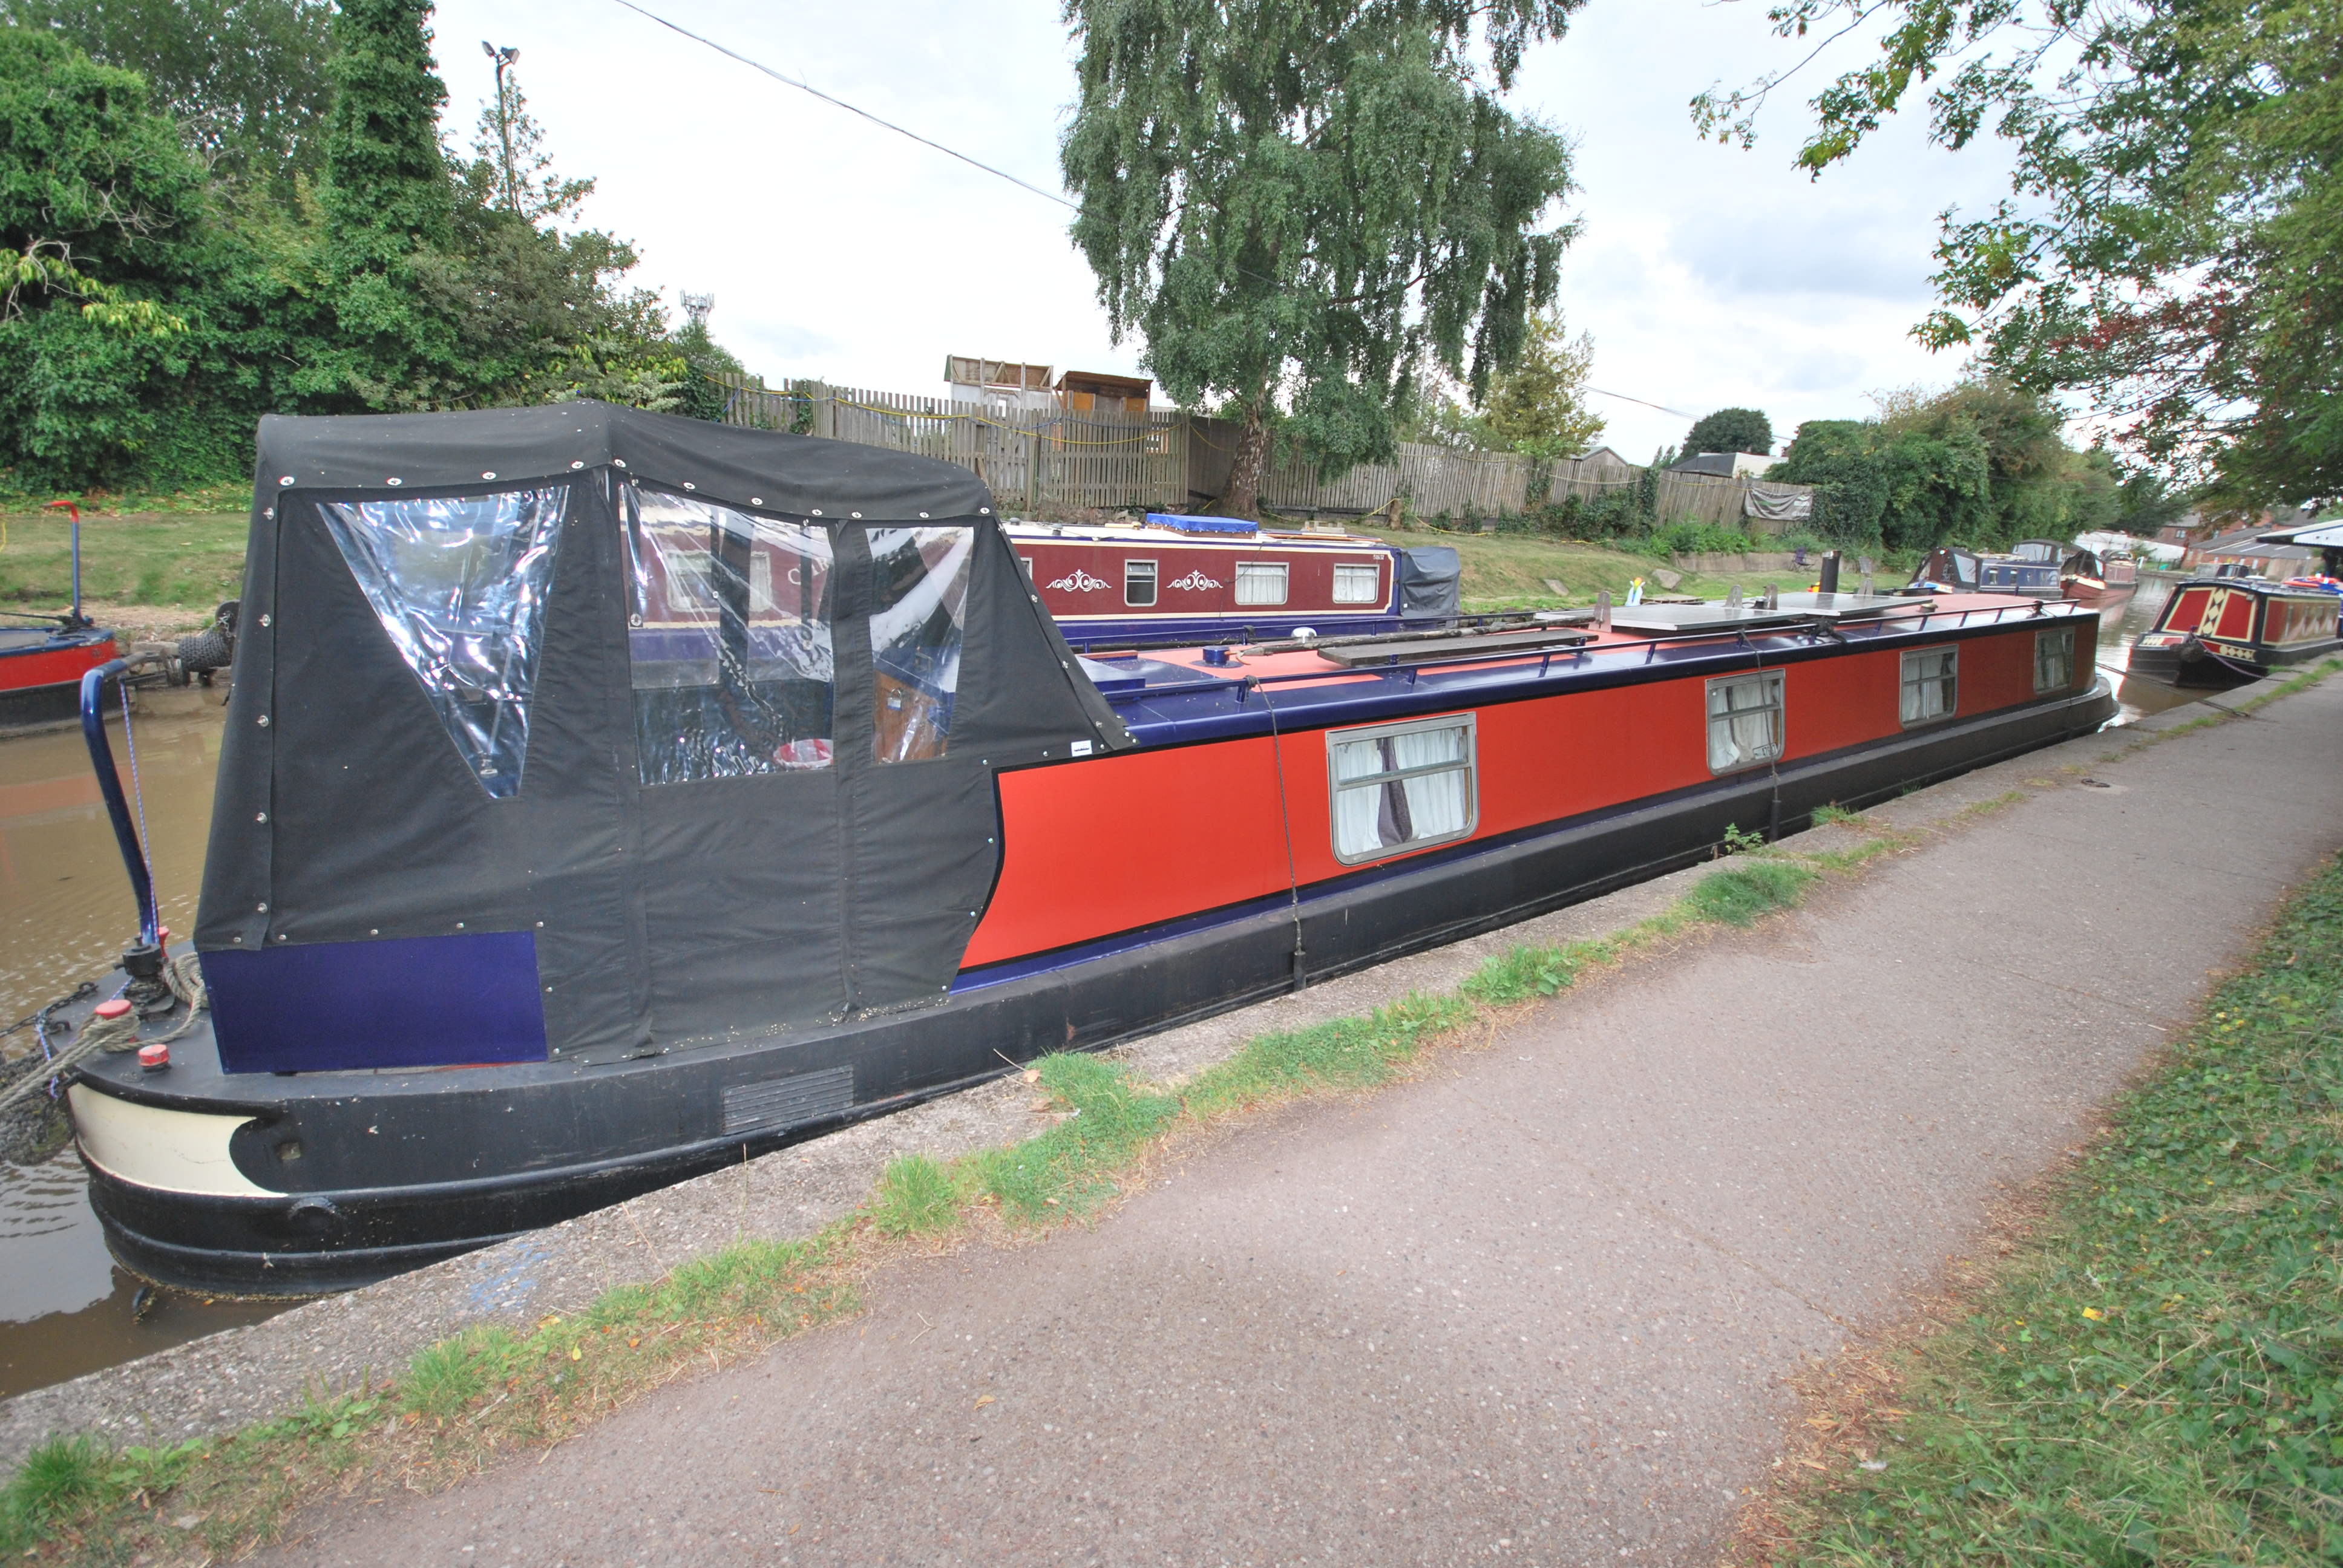 Luvly Jubbly - 56ft Cruiser Stern Liveaboard Narrowboat - For Sale 4